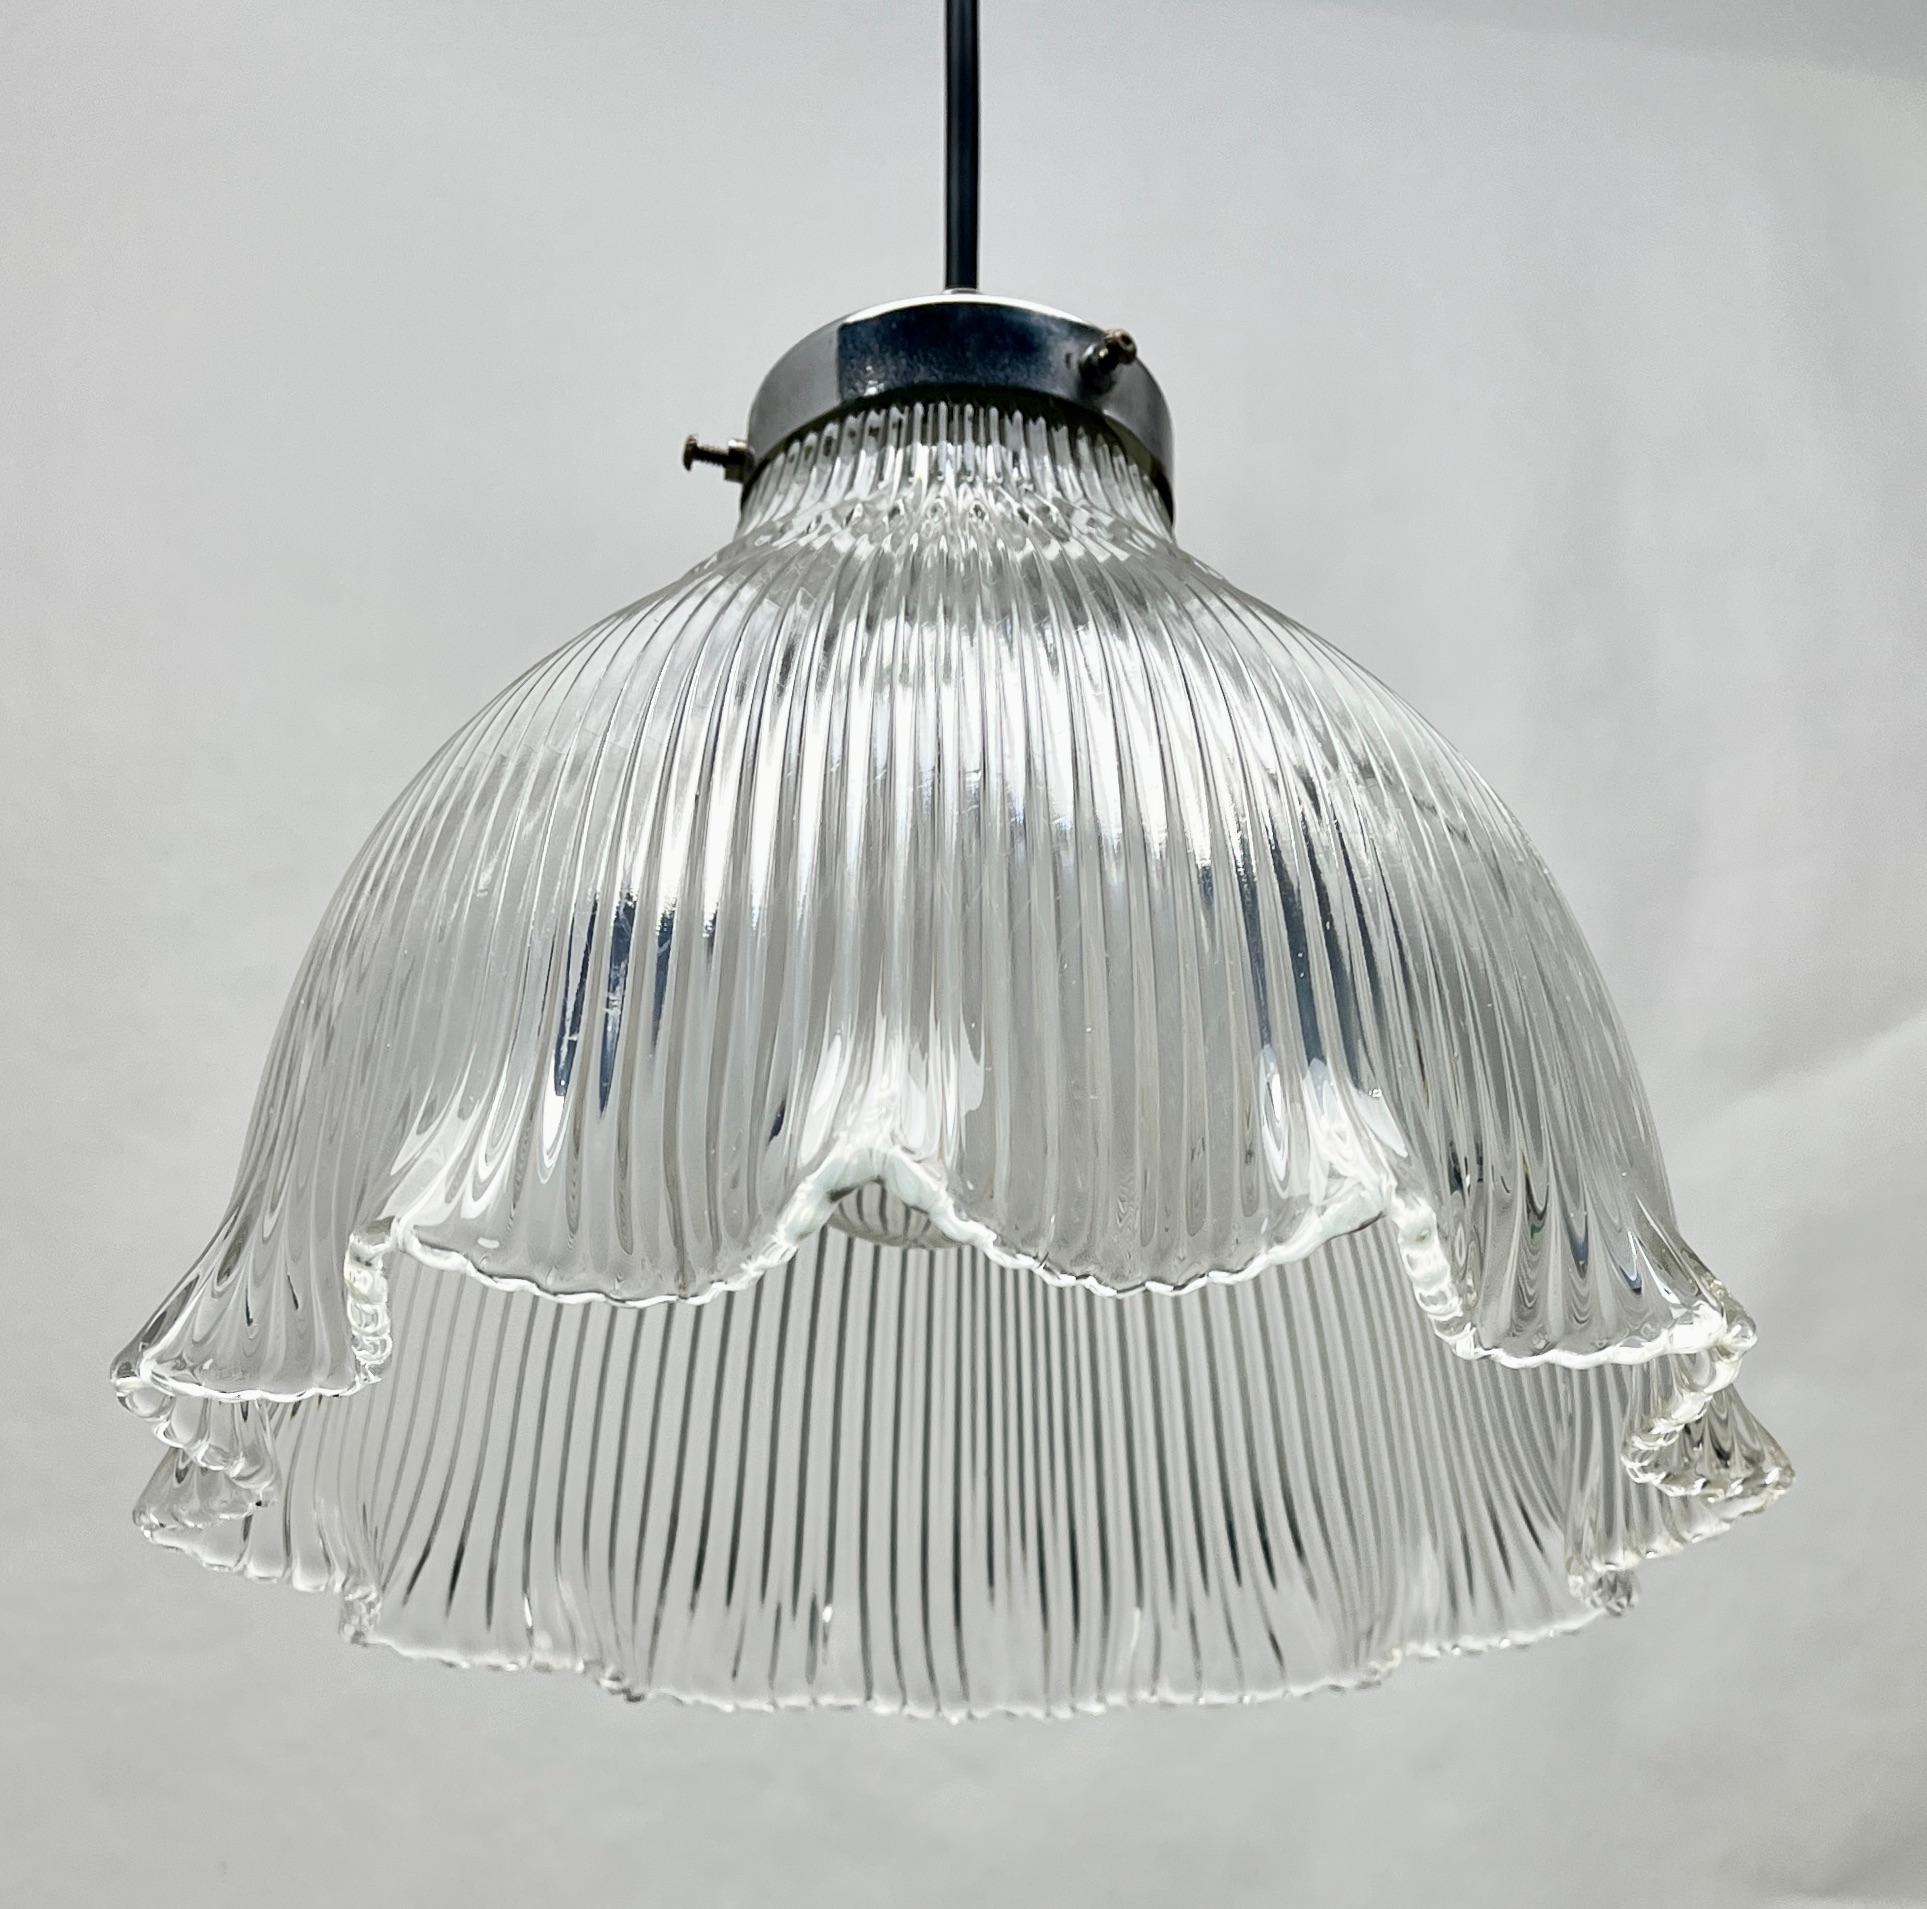 Pendant Lamp with a Corrugated Glass Shade, 1950s, Netherlands For Sale 3